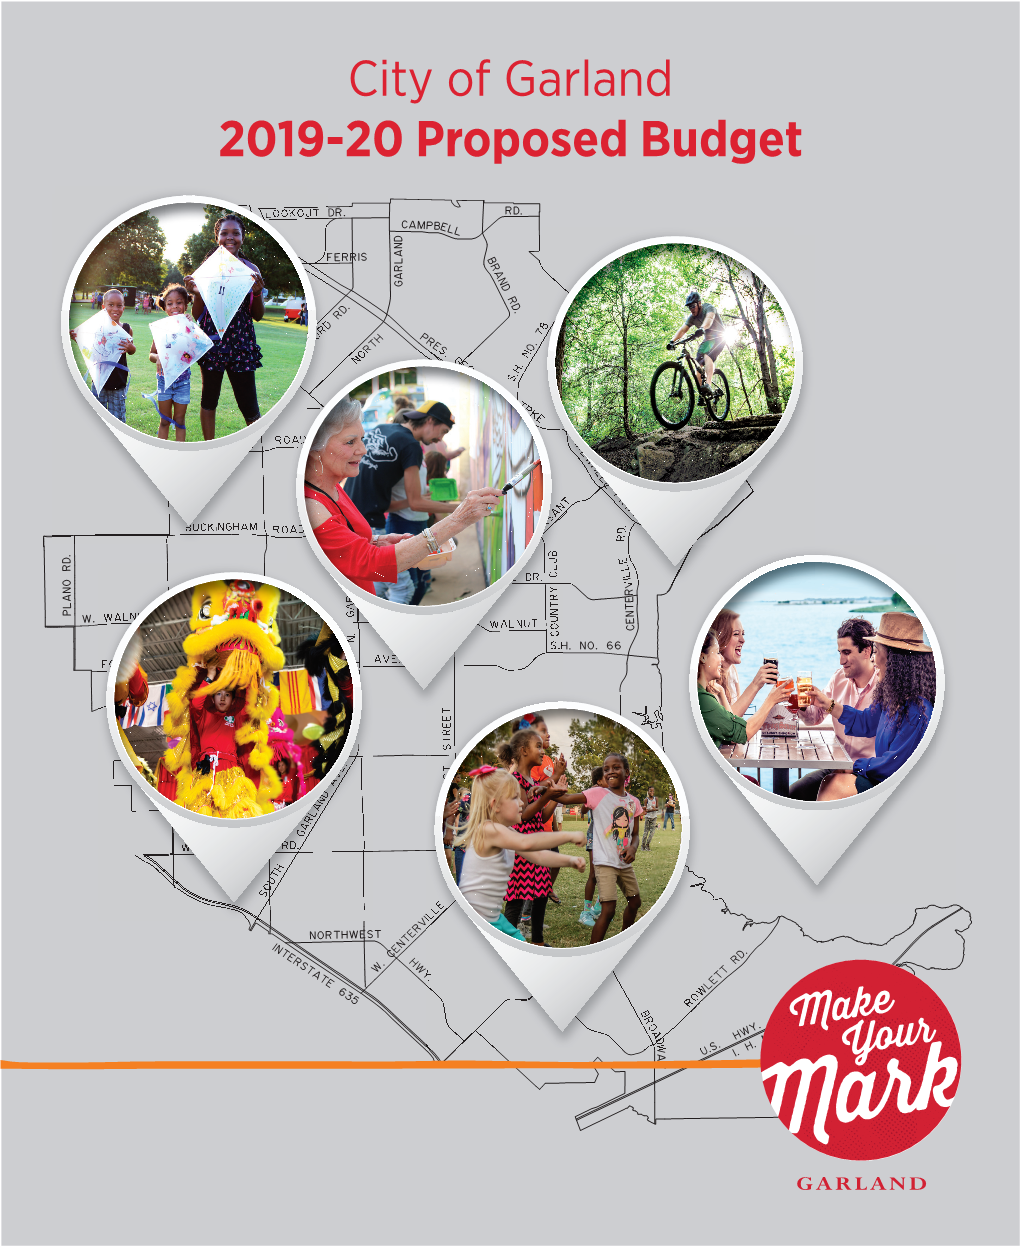 City of Garland 2019-20 Proposed Budget